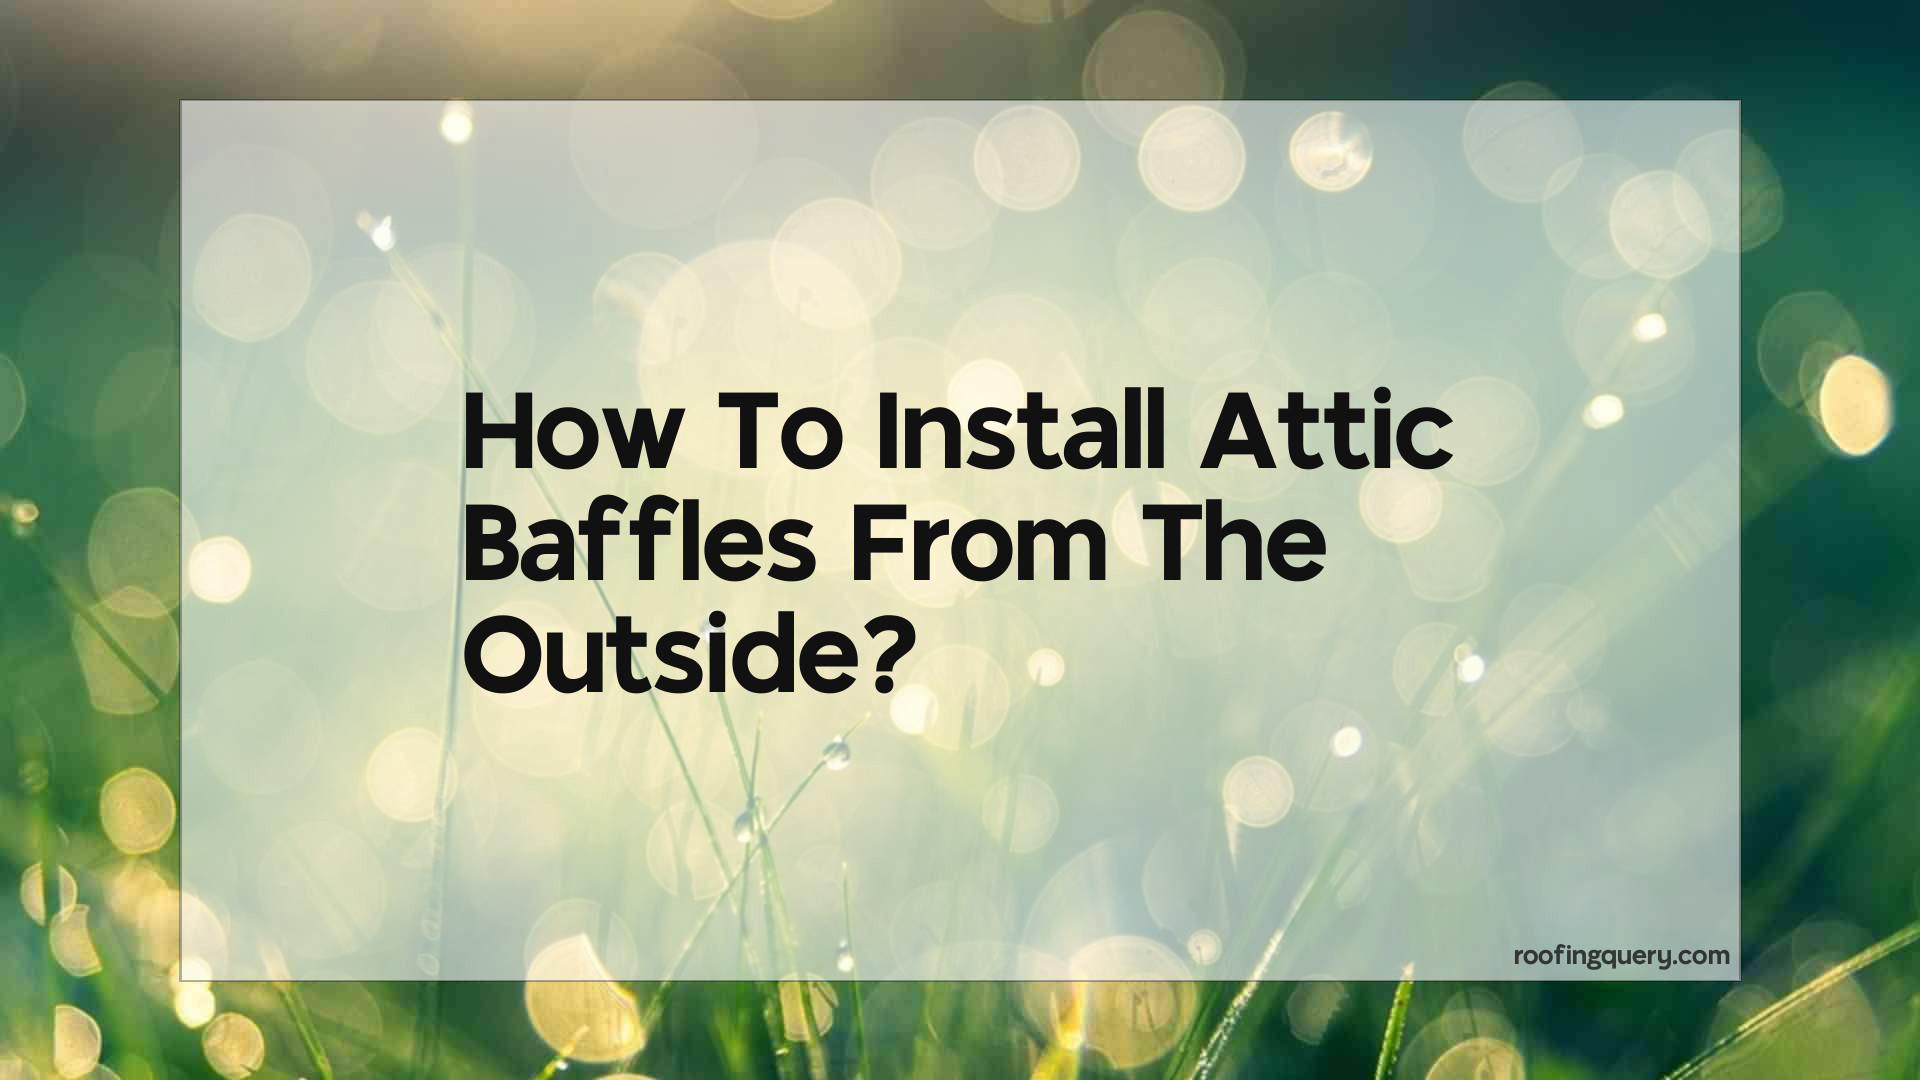 How To Install Attic Baffles From The Outside